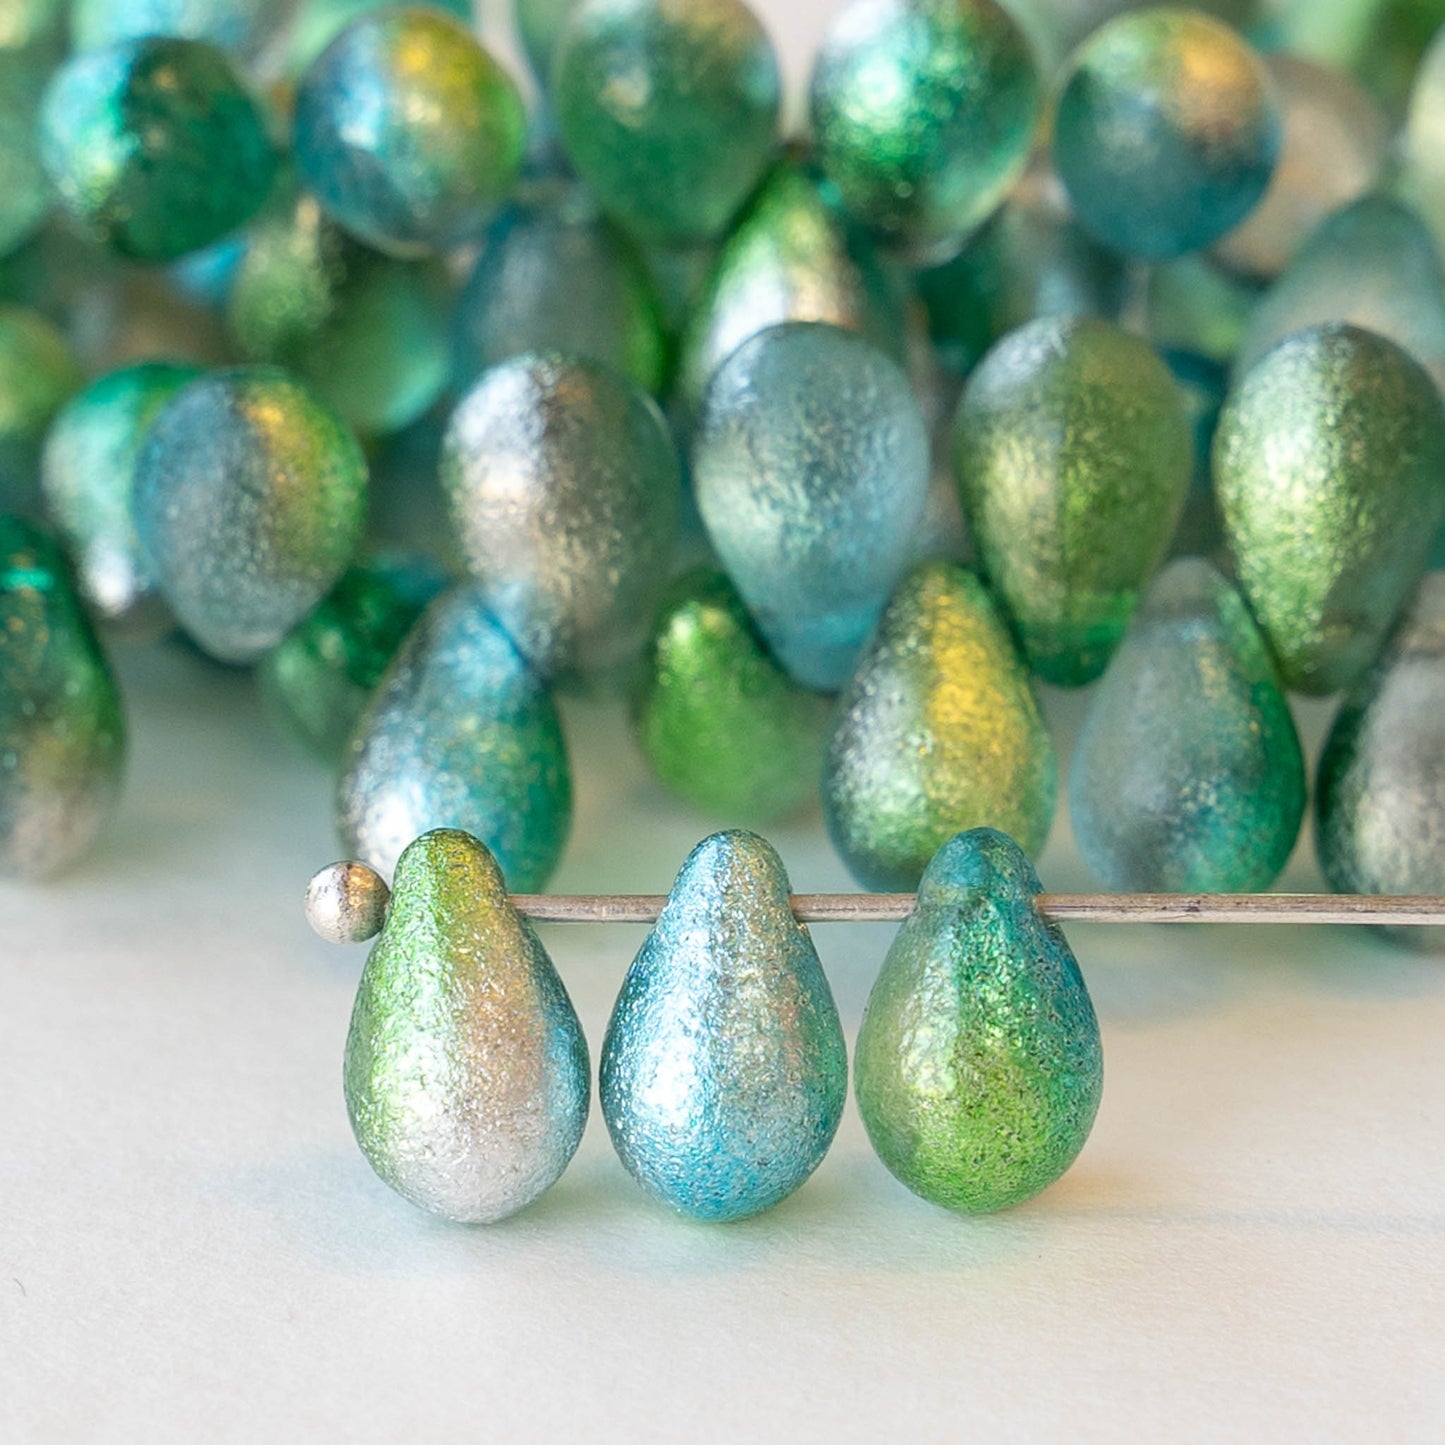 6x9mm Glass Teardrop Beads - Etched Aqua and Green - 25 beads